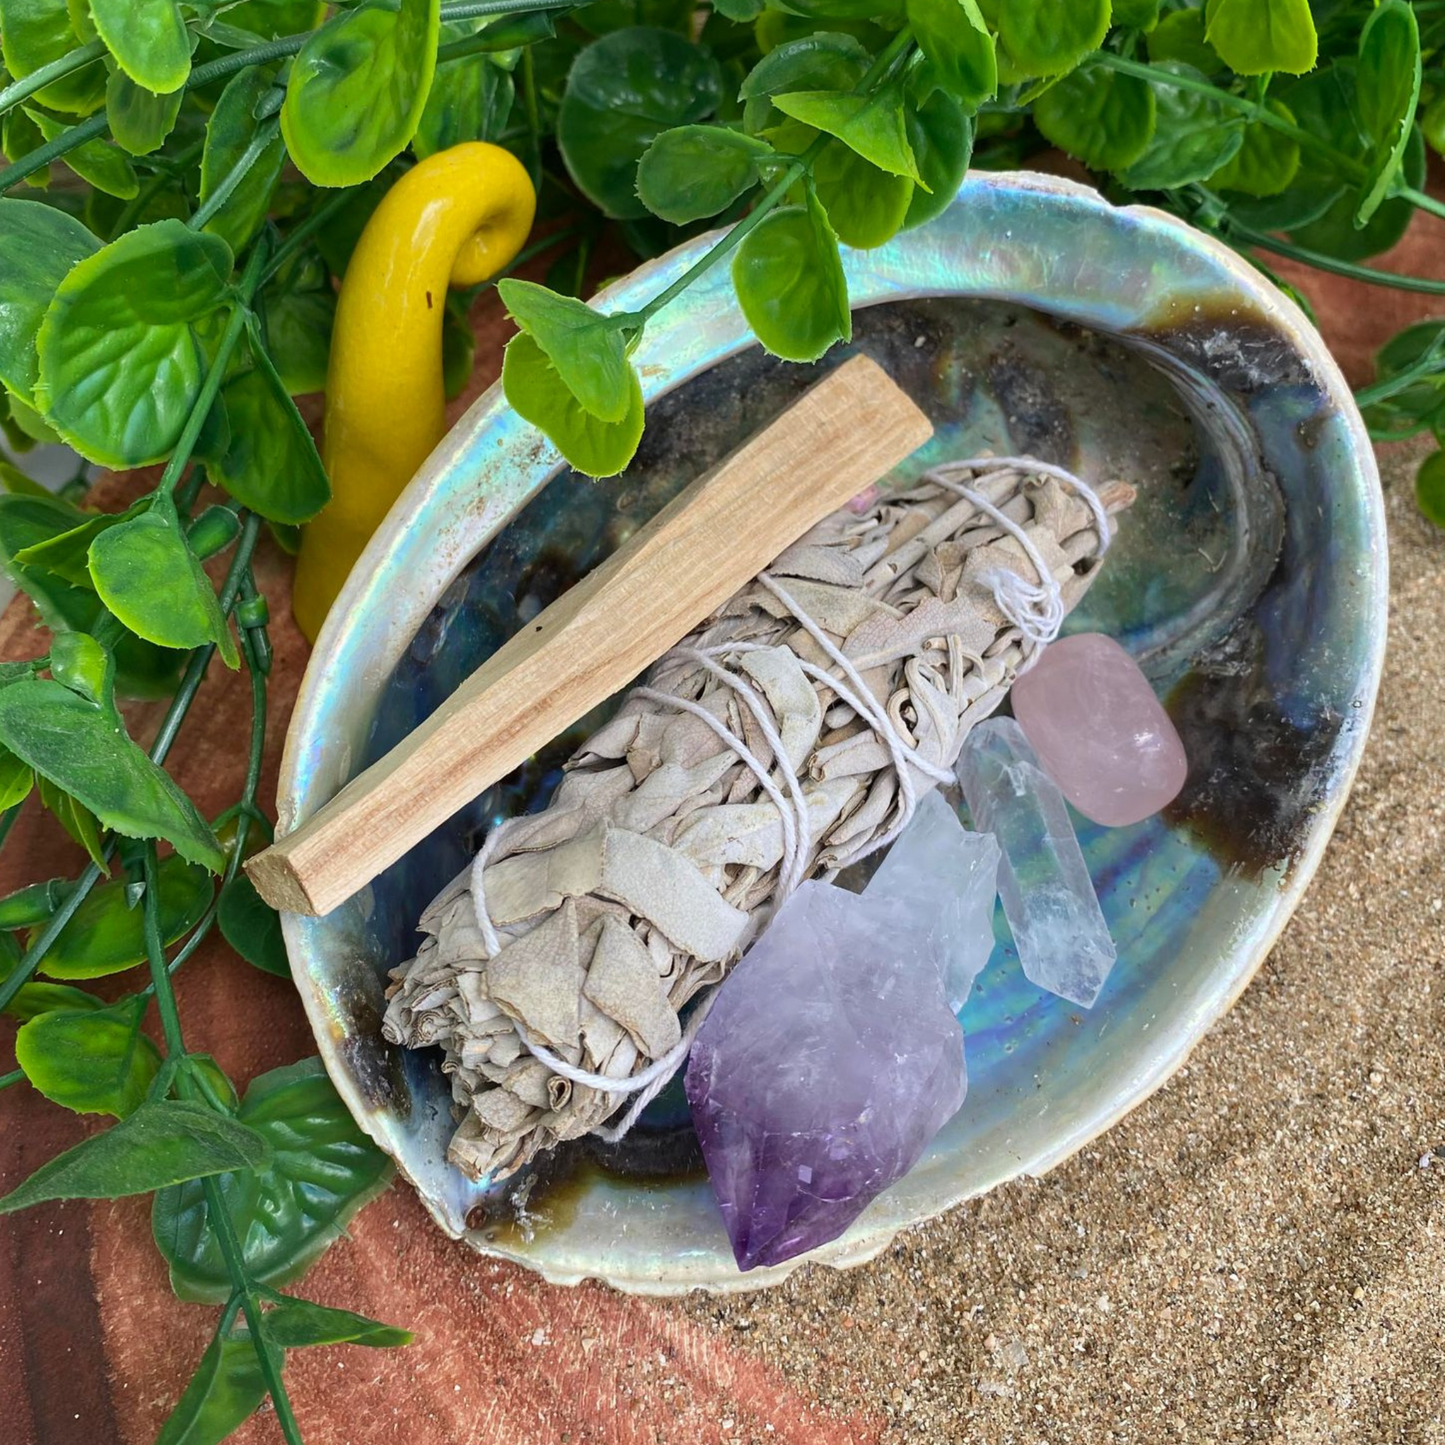 Amethyst Point, Clear Quartz Crystal Point, Rose Quartz Tumbled Stone, Palo Santo, Sage Smudge stick and Natural Abalone Shell